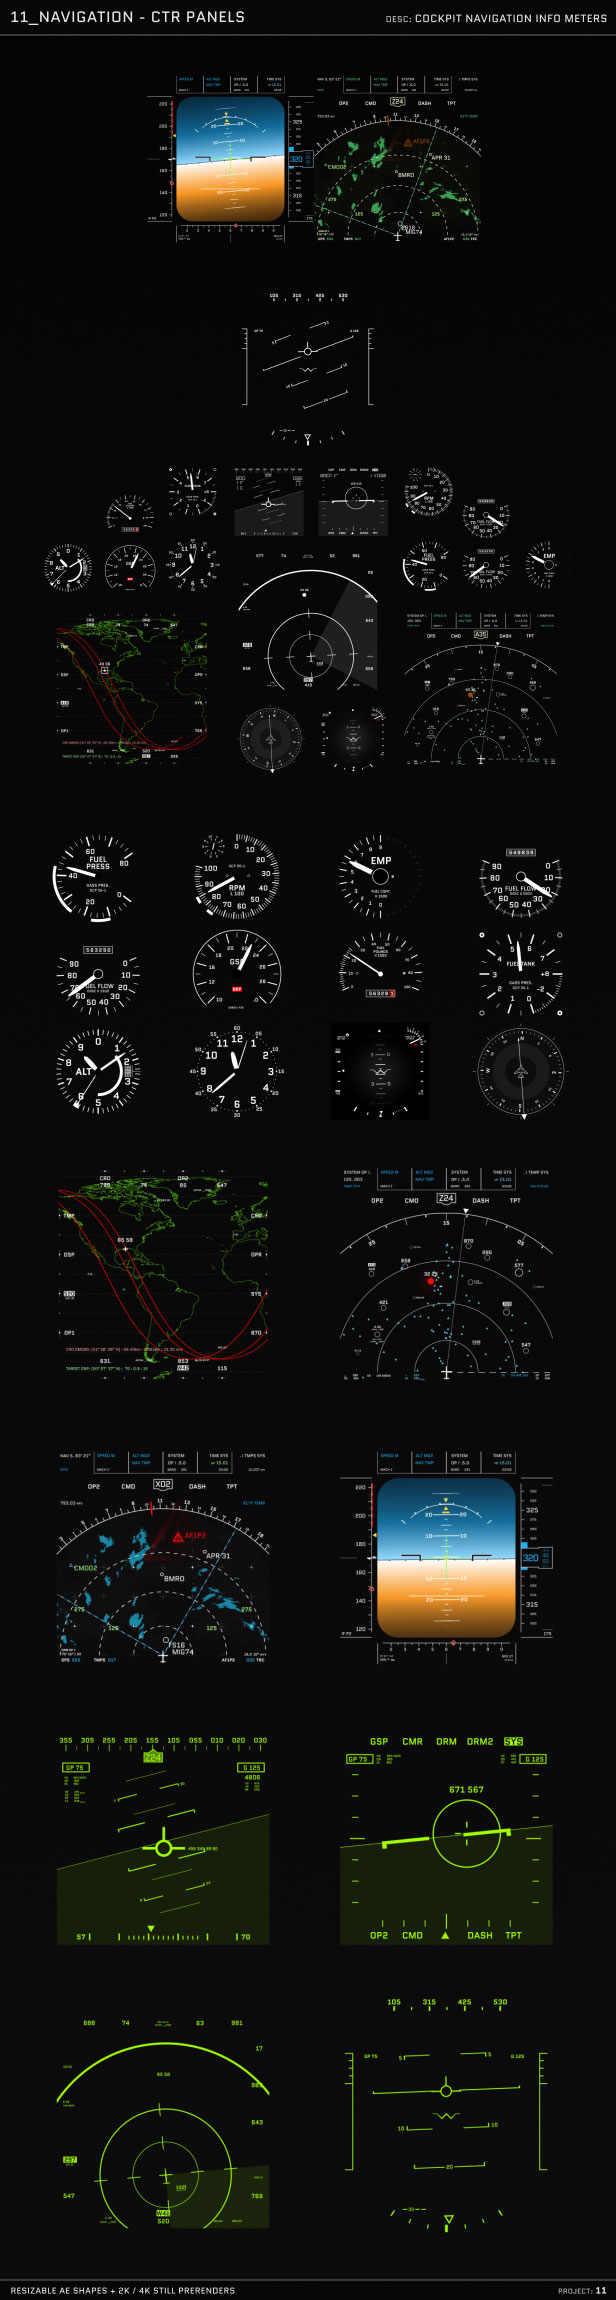 HUD - UI Graphics for FILM, TV and GAMES - 13